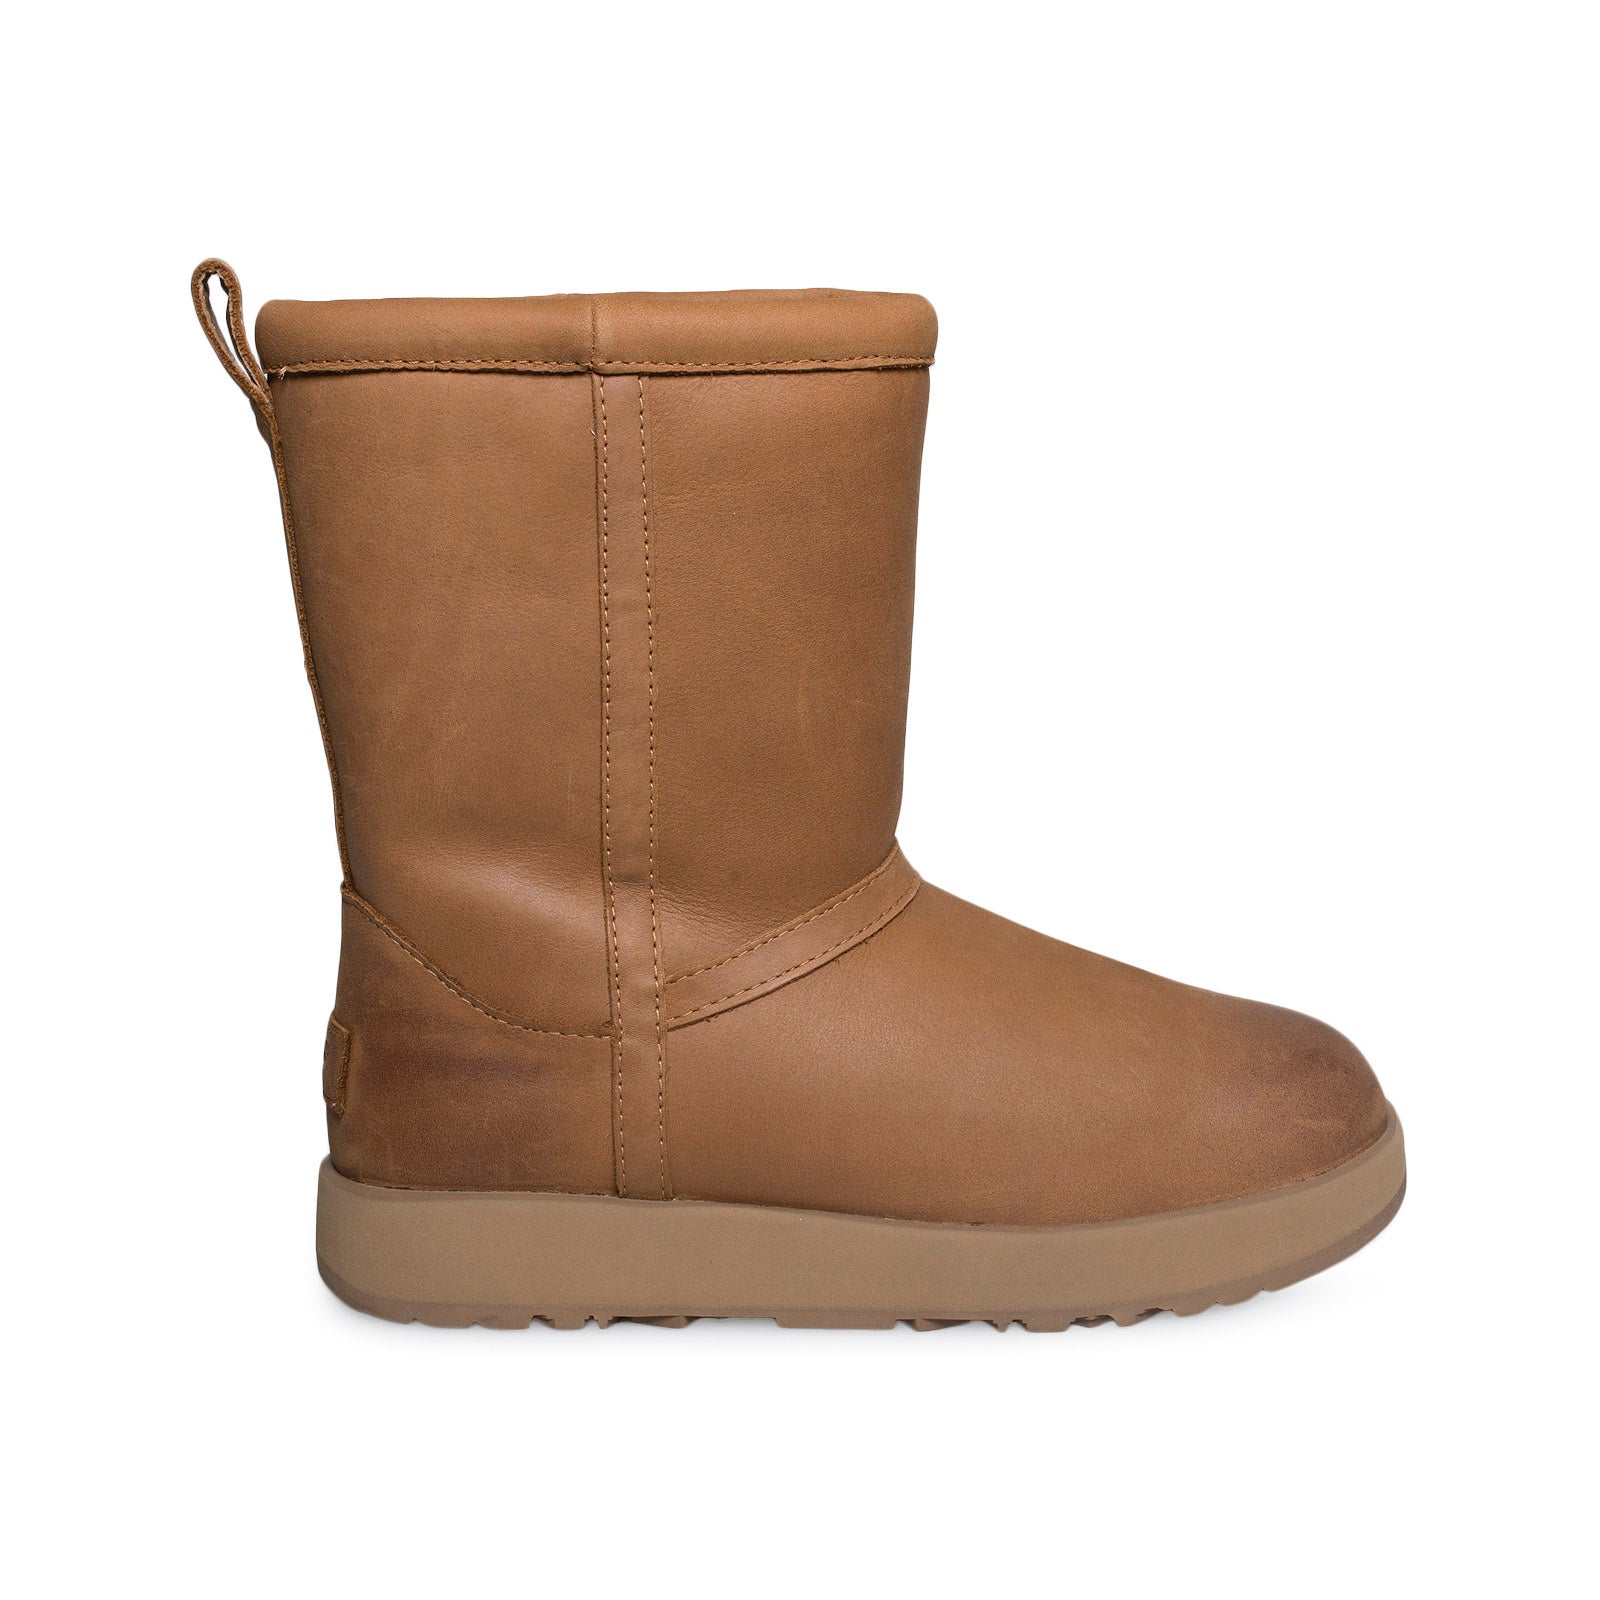 ugg classic short leather waterproof